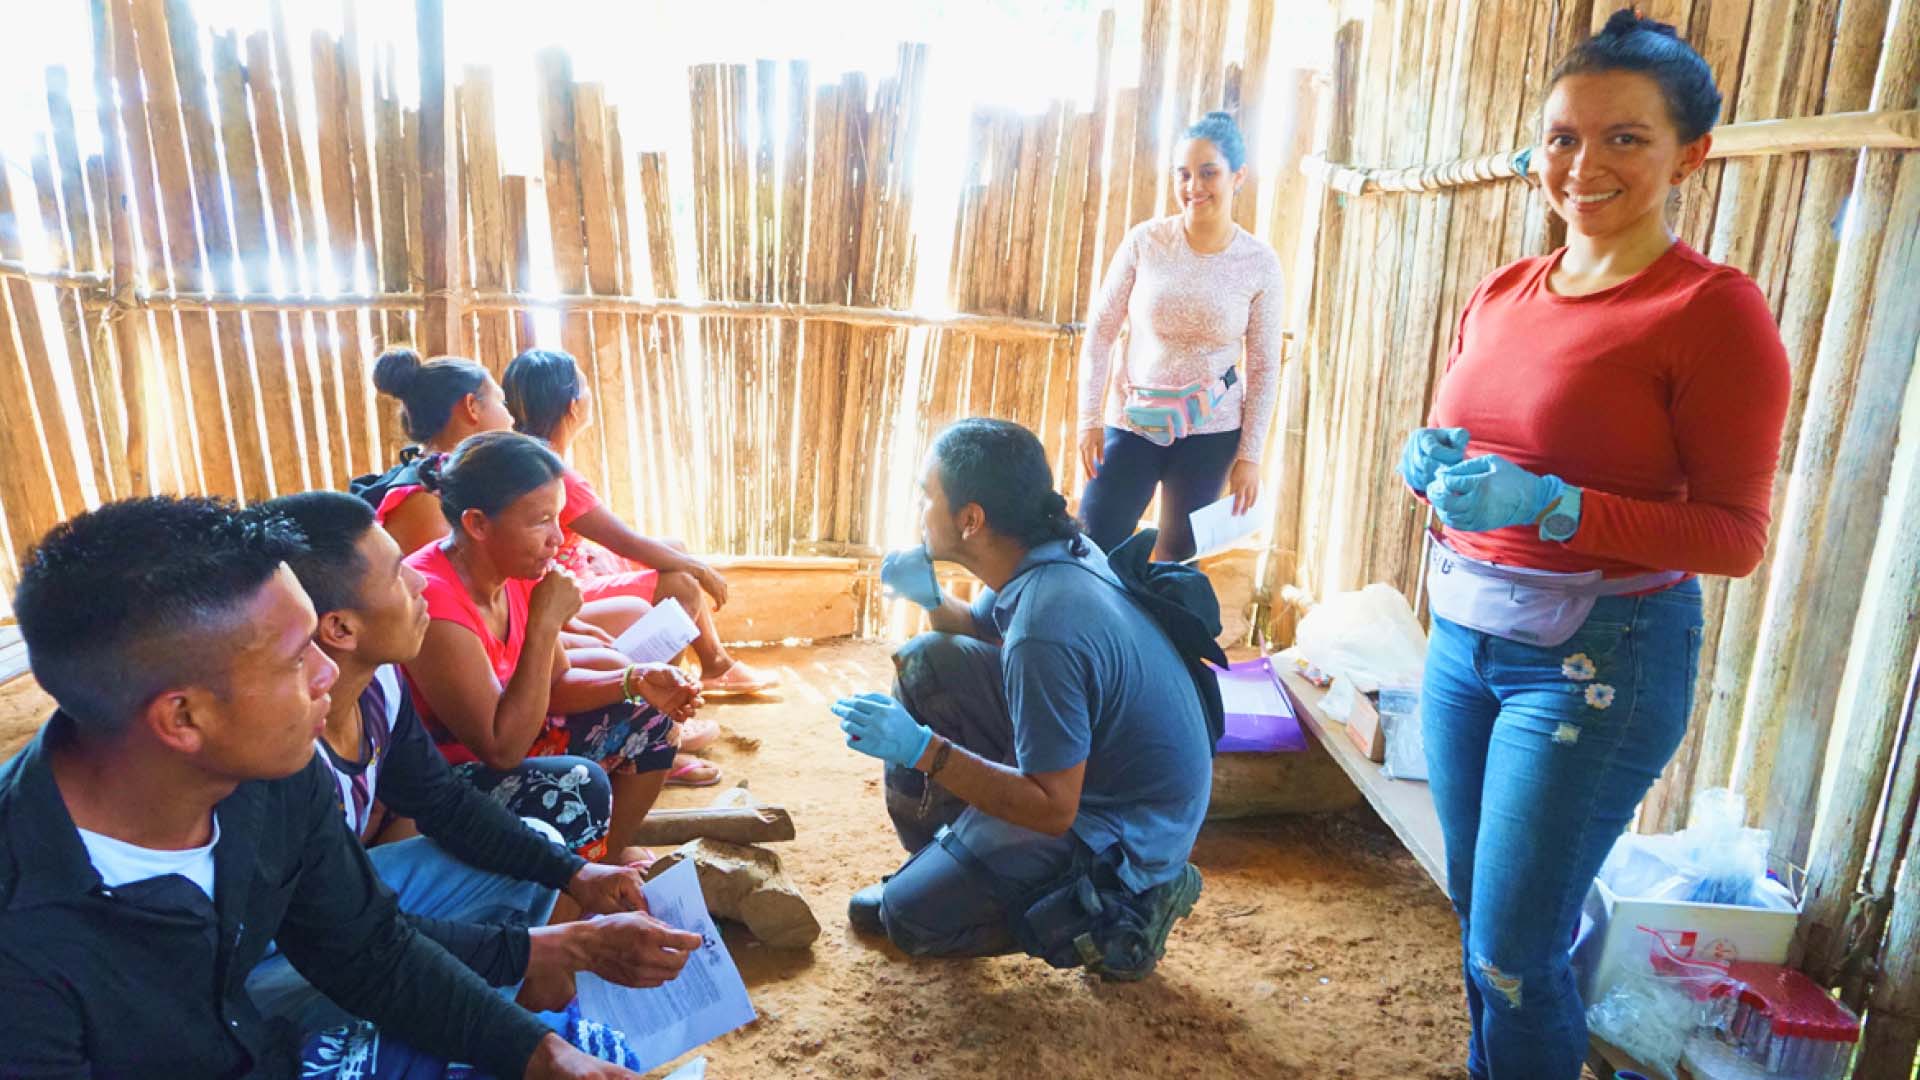 Local sampling coordinator Marisol Espitia stands next to two research team members, smiling, with one of them crouching while talking to members of the local community. The researchers are wearing blue gloves and are all gathered in a sunny room with vertical wood planks making up the walls